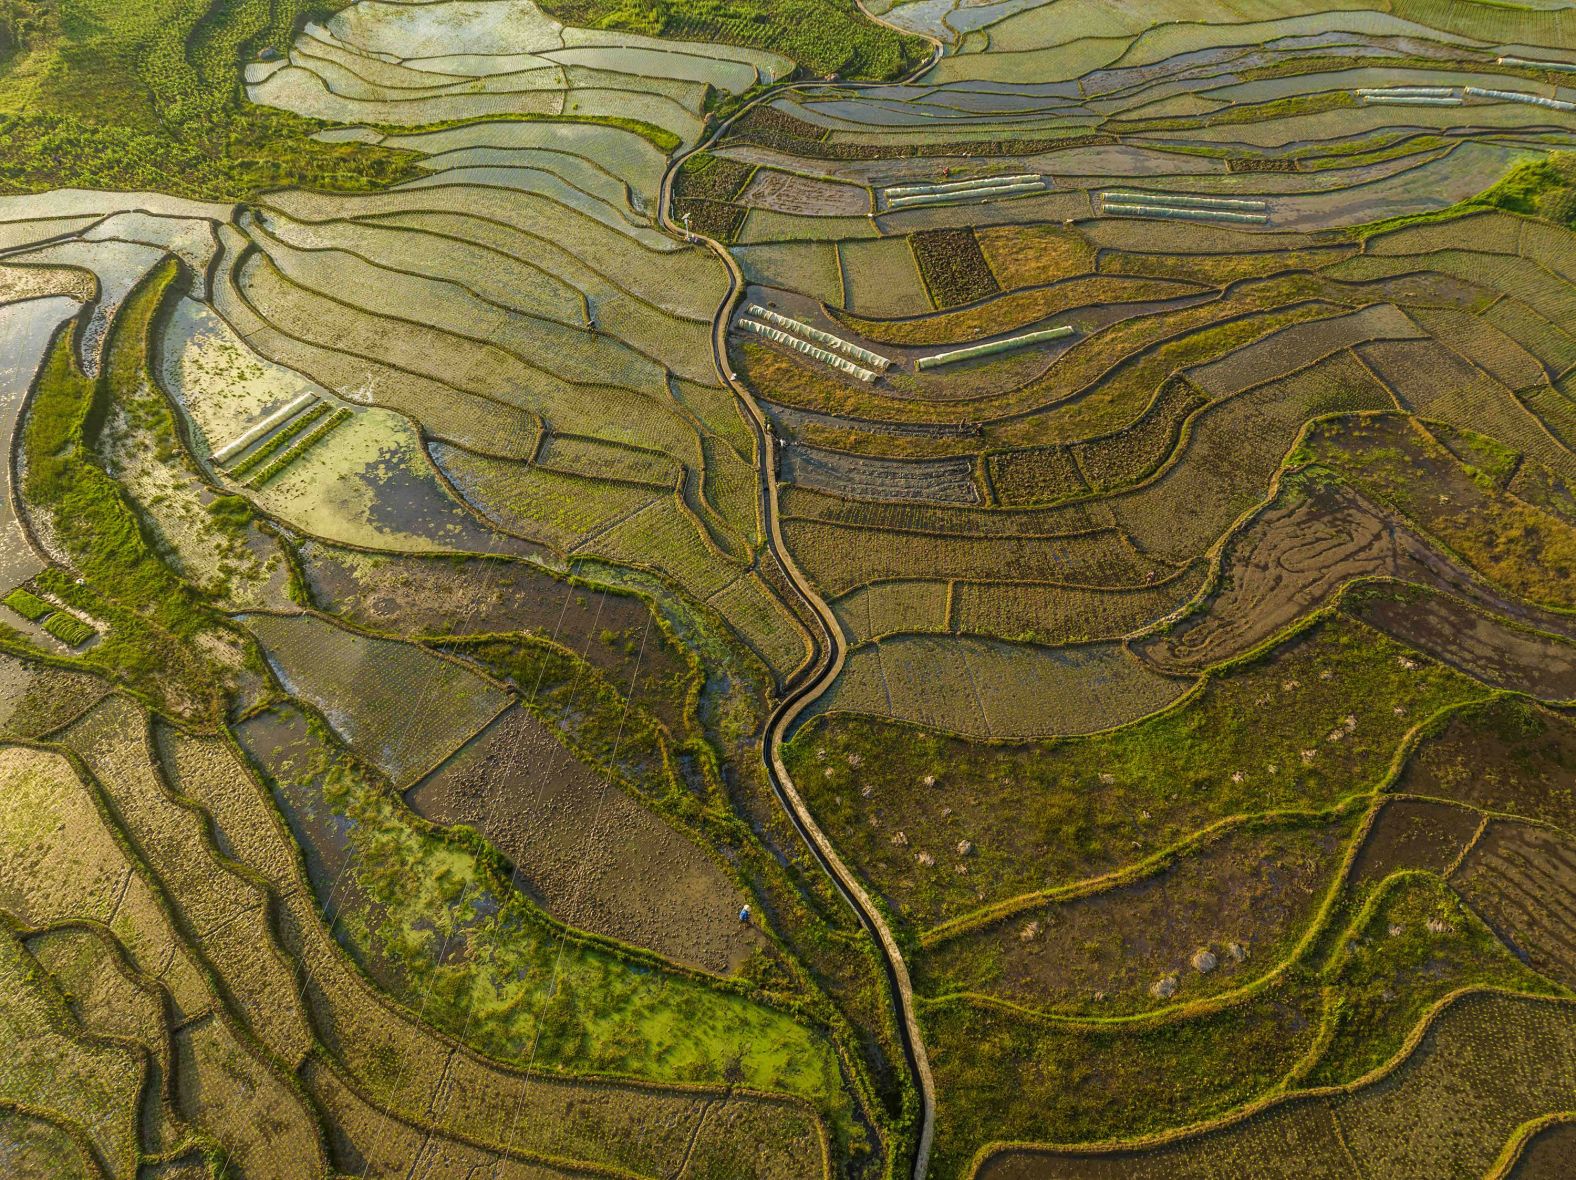 Villagers work in a terraced field in Shiyuan, a village in Bijie, China, on Monday, May 13.